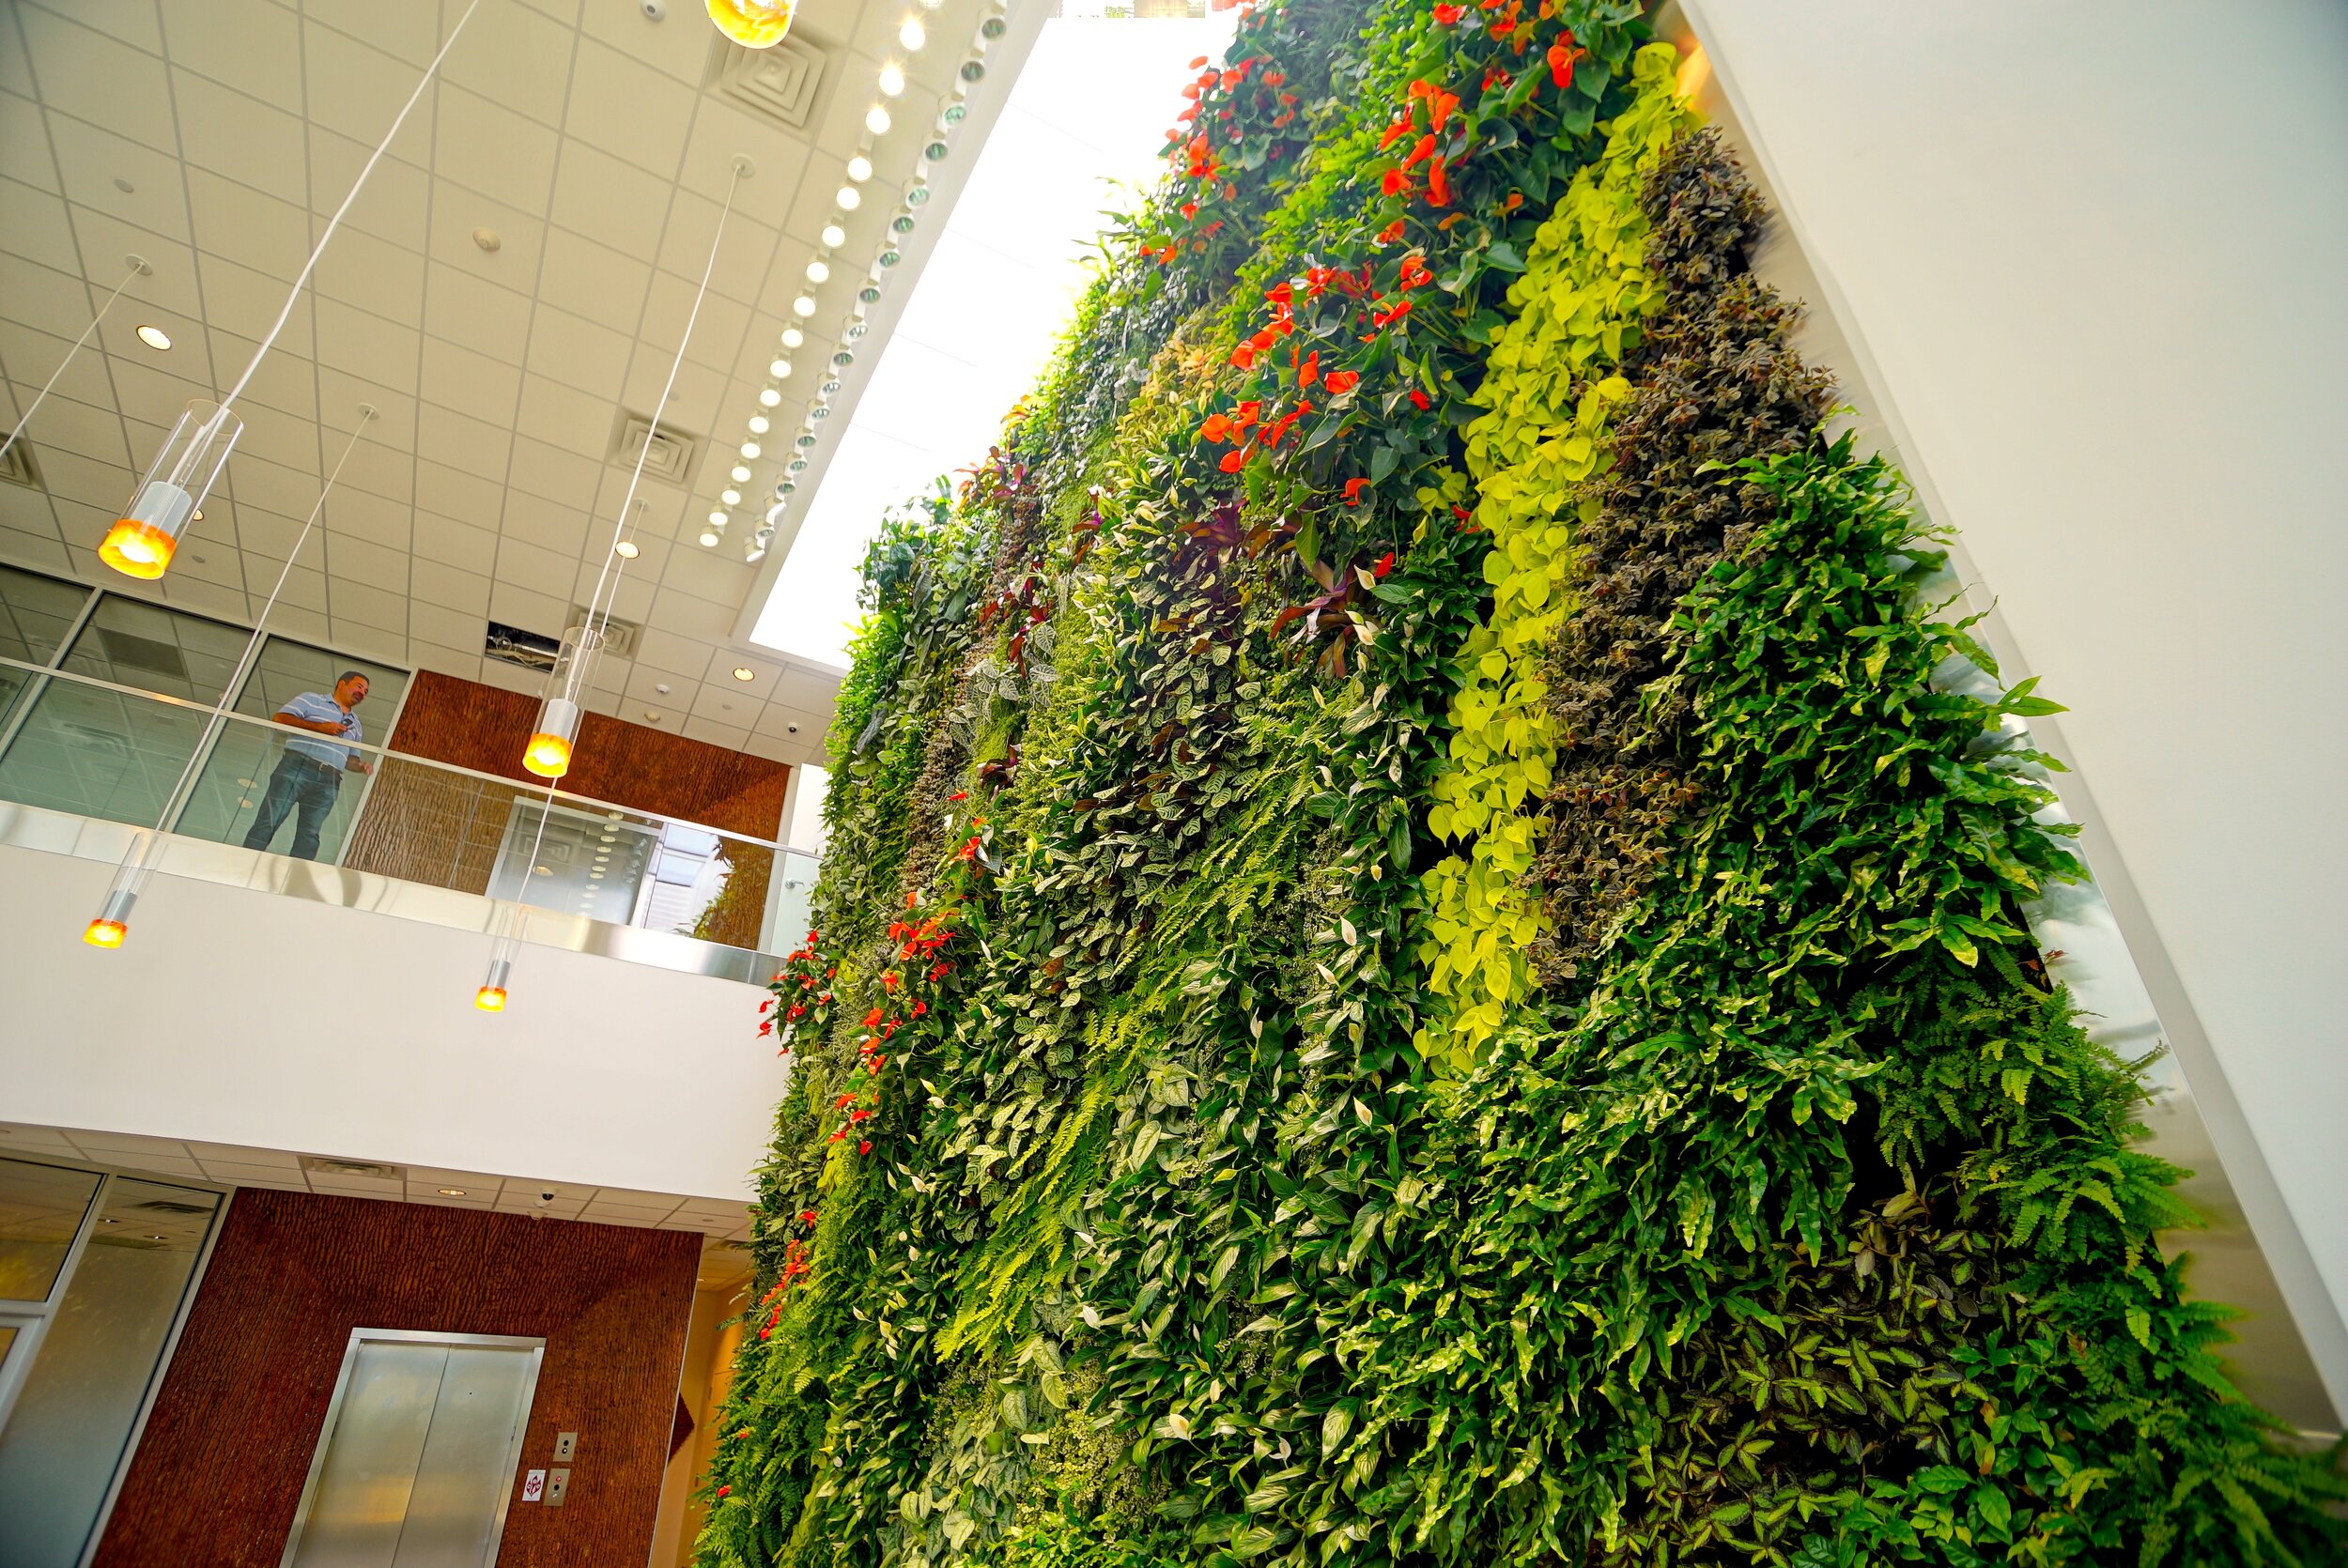 urbanstrong_IFF lobby wall_view from below.JPG